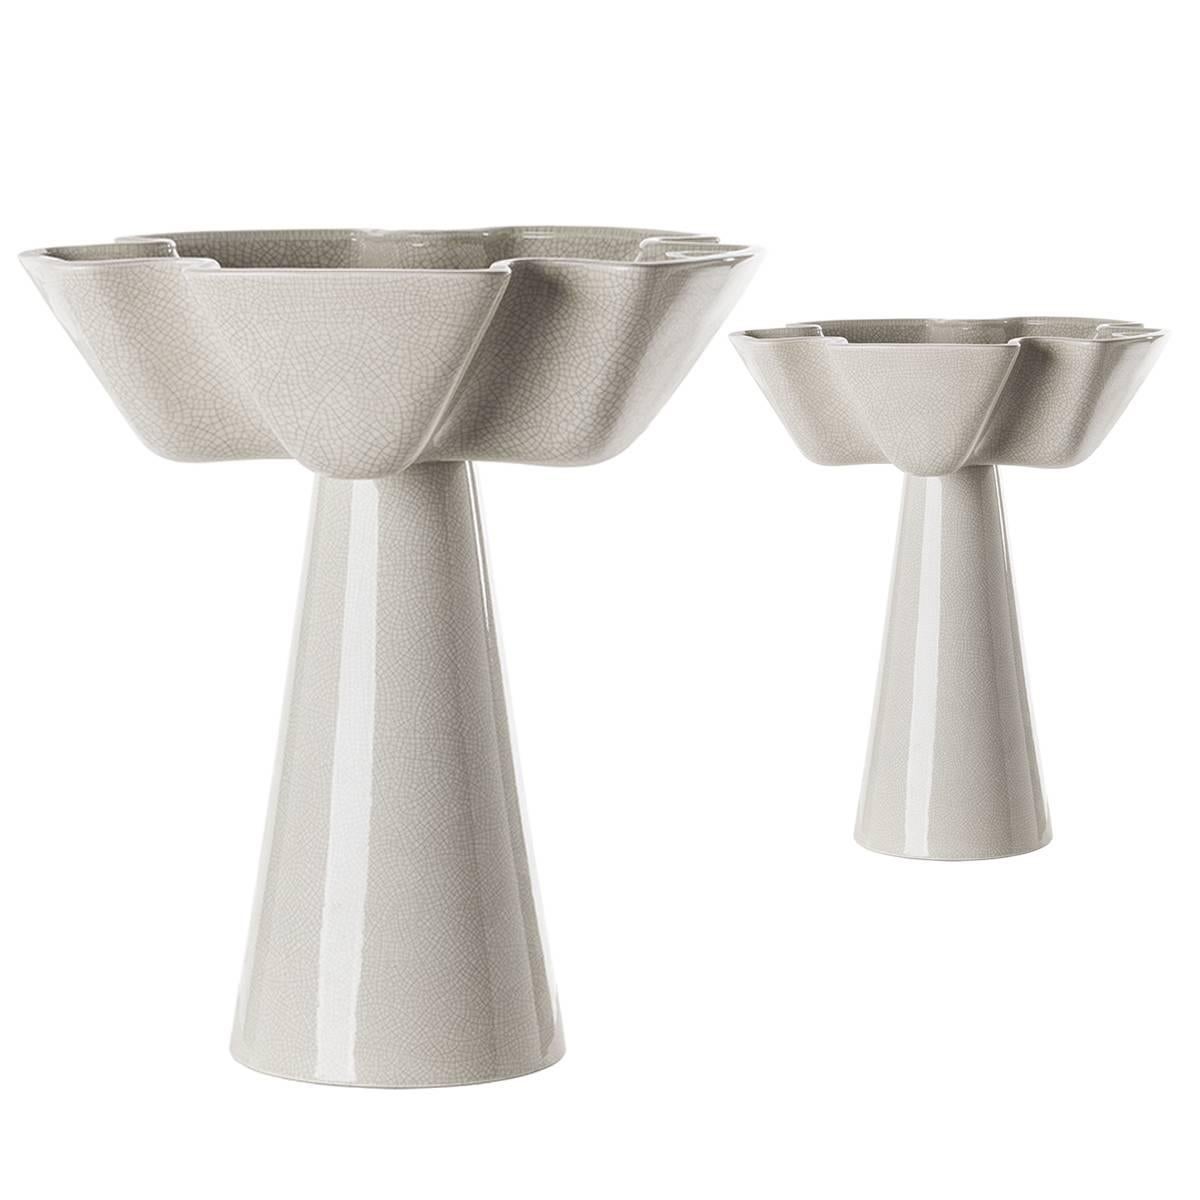 Pair of Ceramic Floral-Shaped Centerpieces For Sale